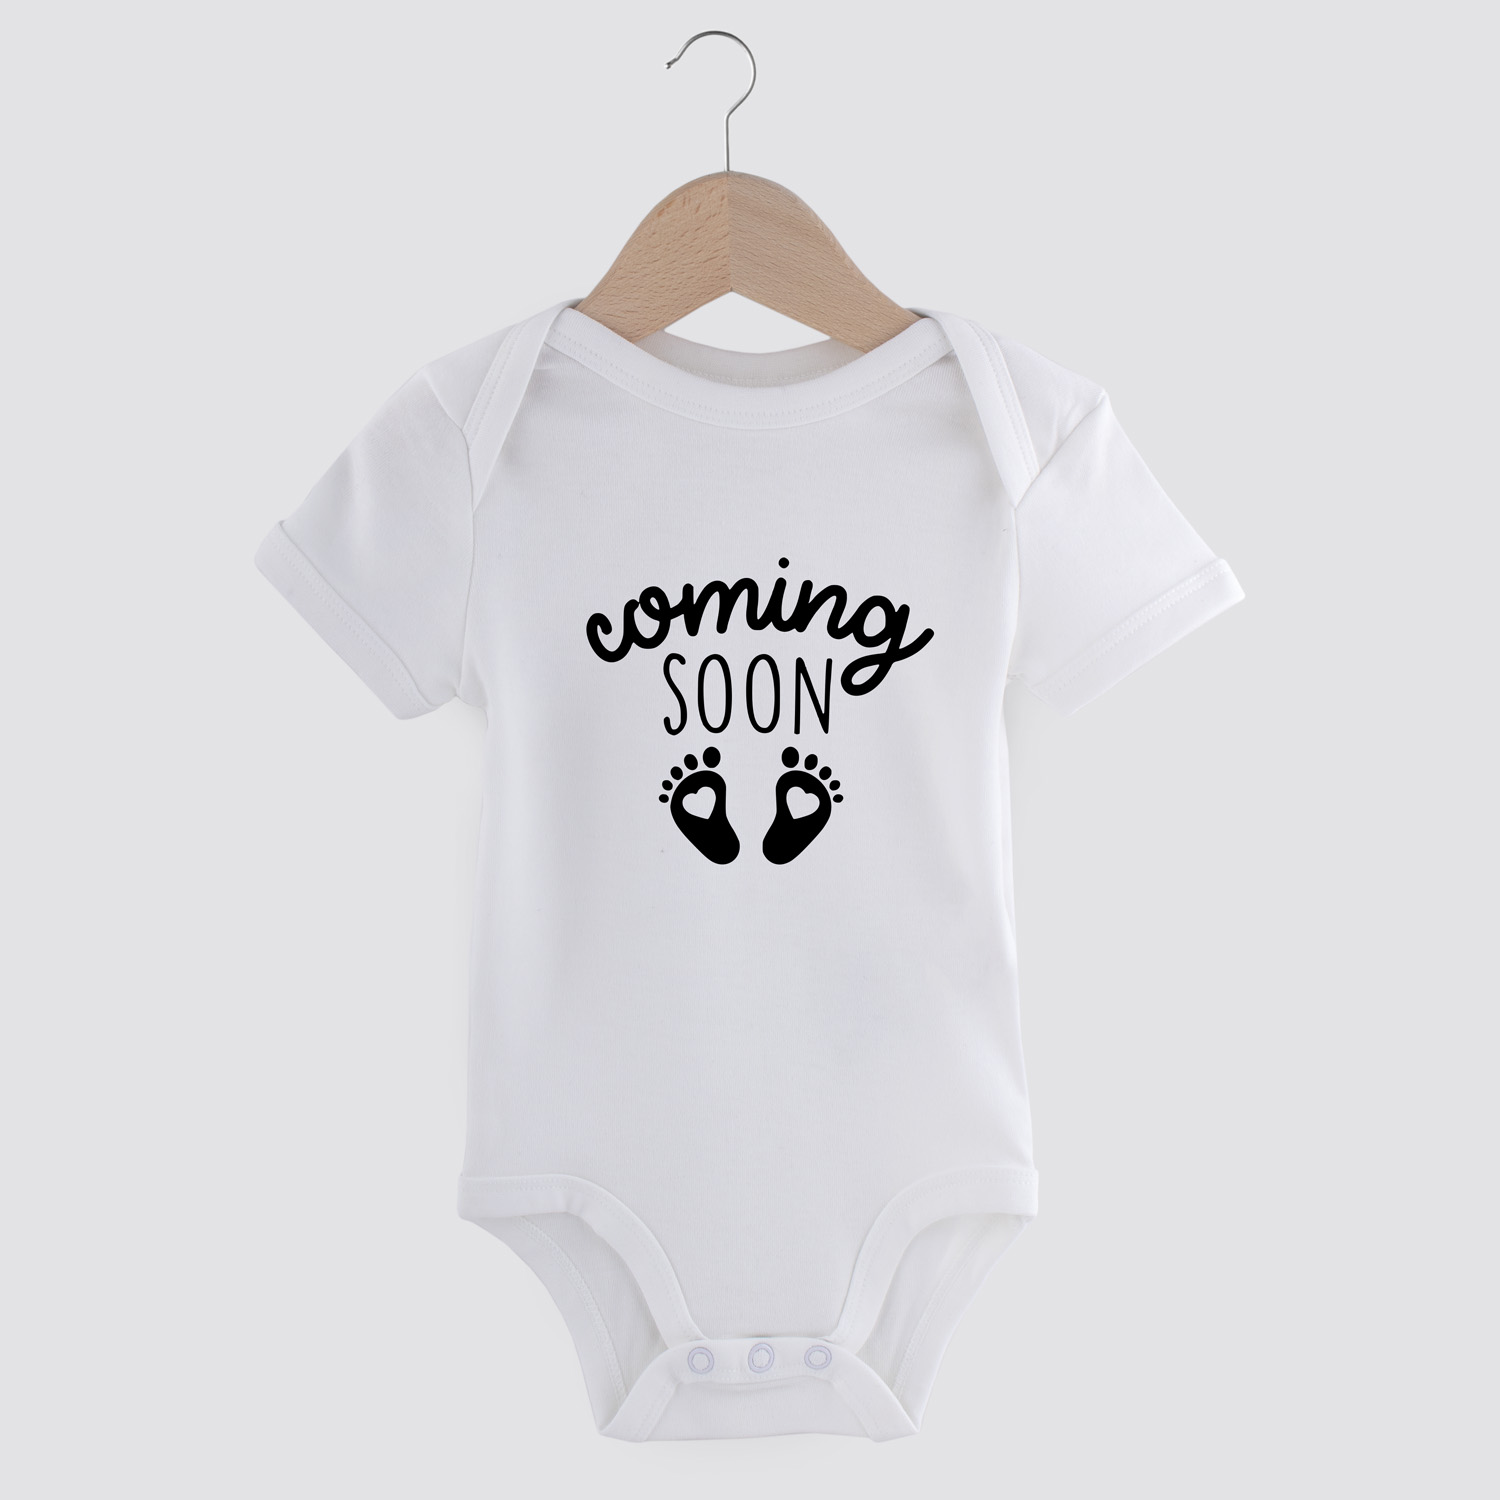 Coming soon | Baby romper | my fabulous life.